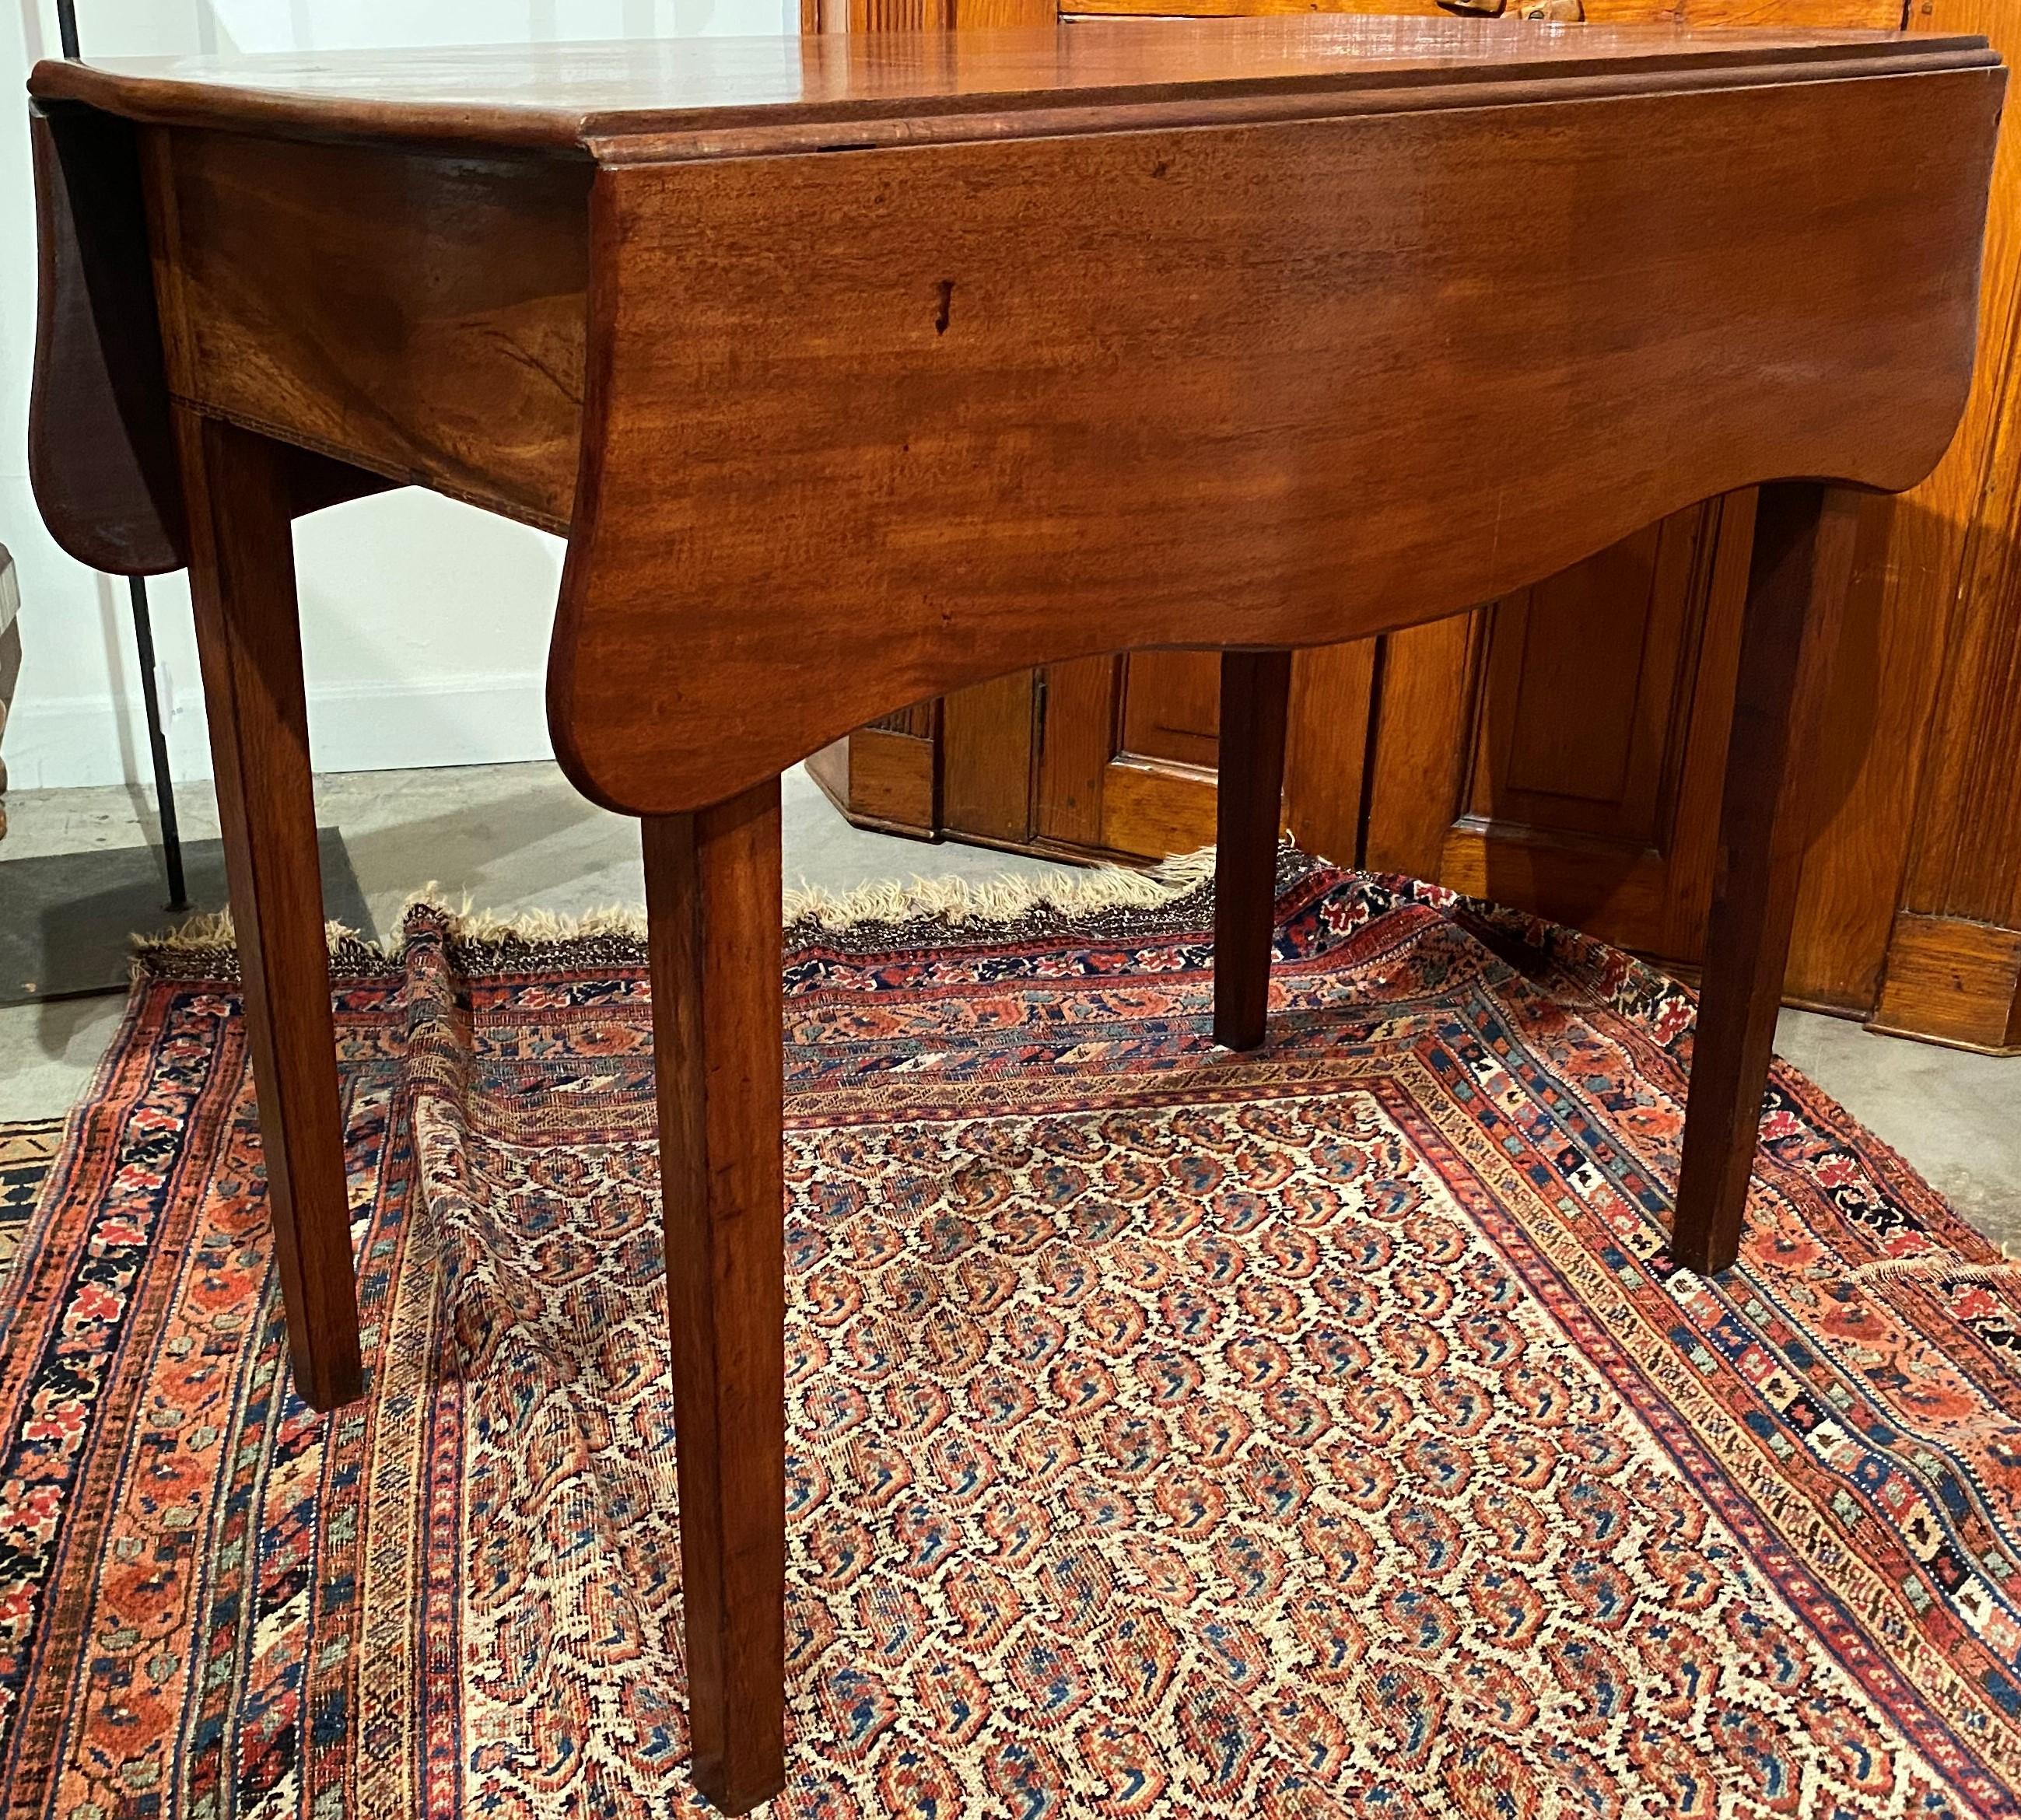 Hand-Crafted Period 18th Century Drop-Leaf Pembroke Table with Delicate Line Inlay